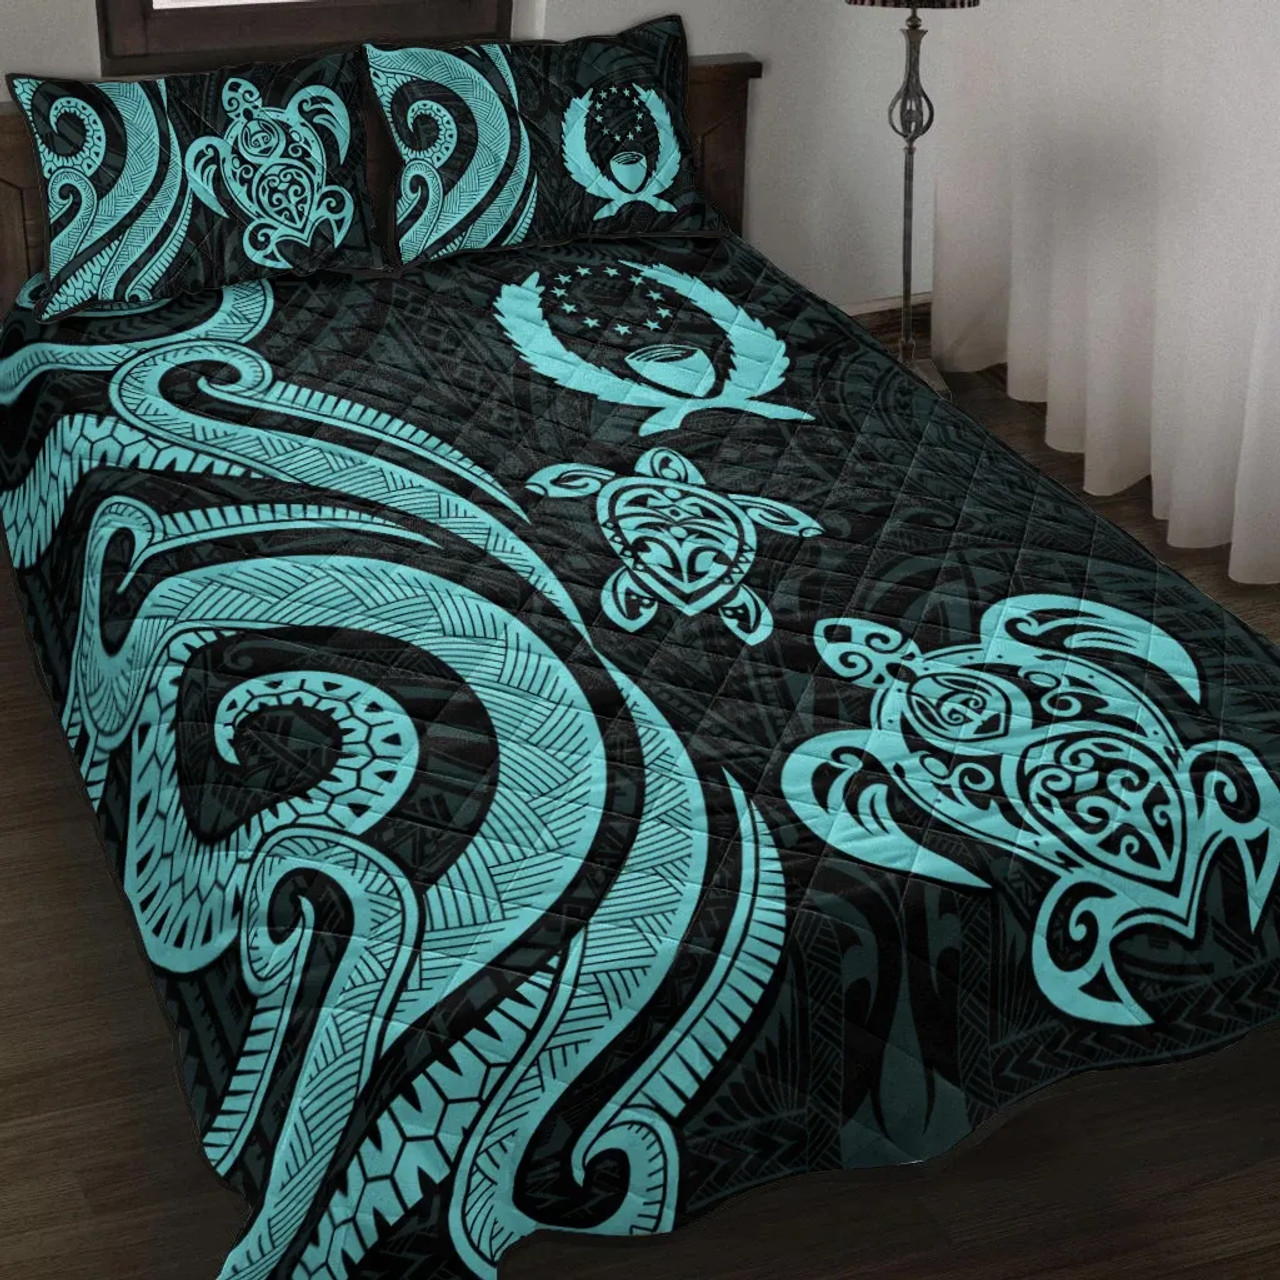 Pohnpei Quilt Bed Set - Turquoise Tentacle Turtle 1